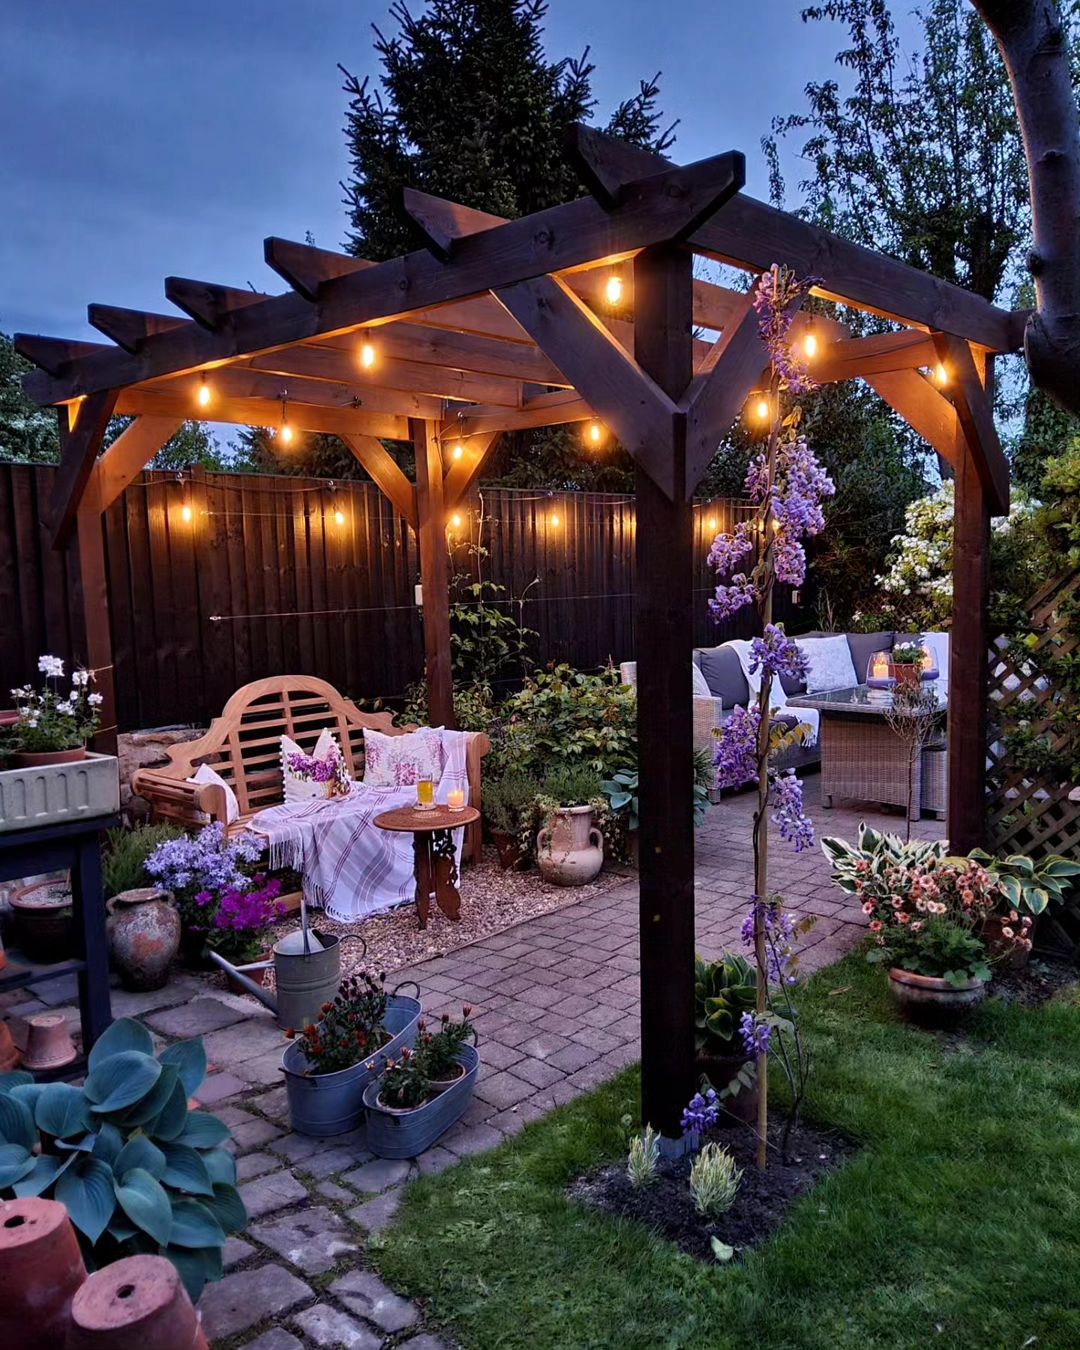 night time gazebo with suspended lights make this garden a beautiful and inviting outdoor spot for relaxation